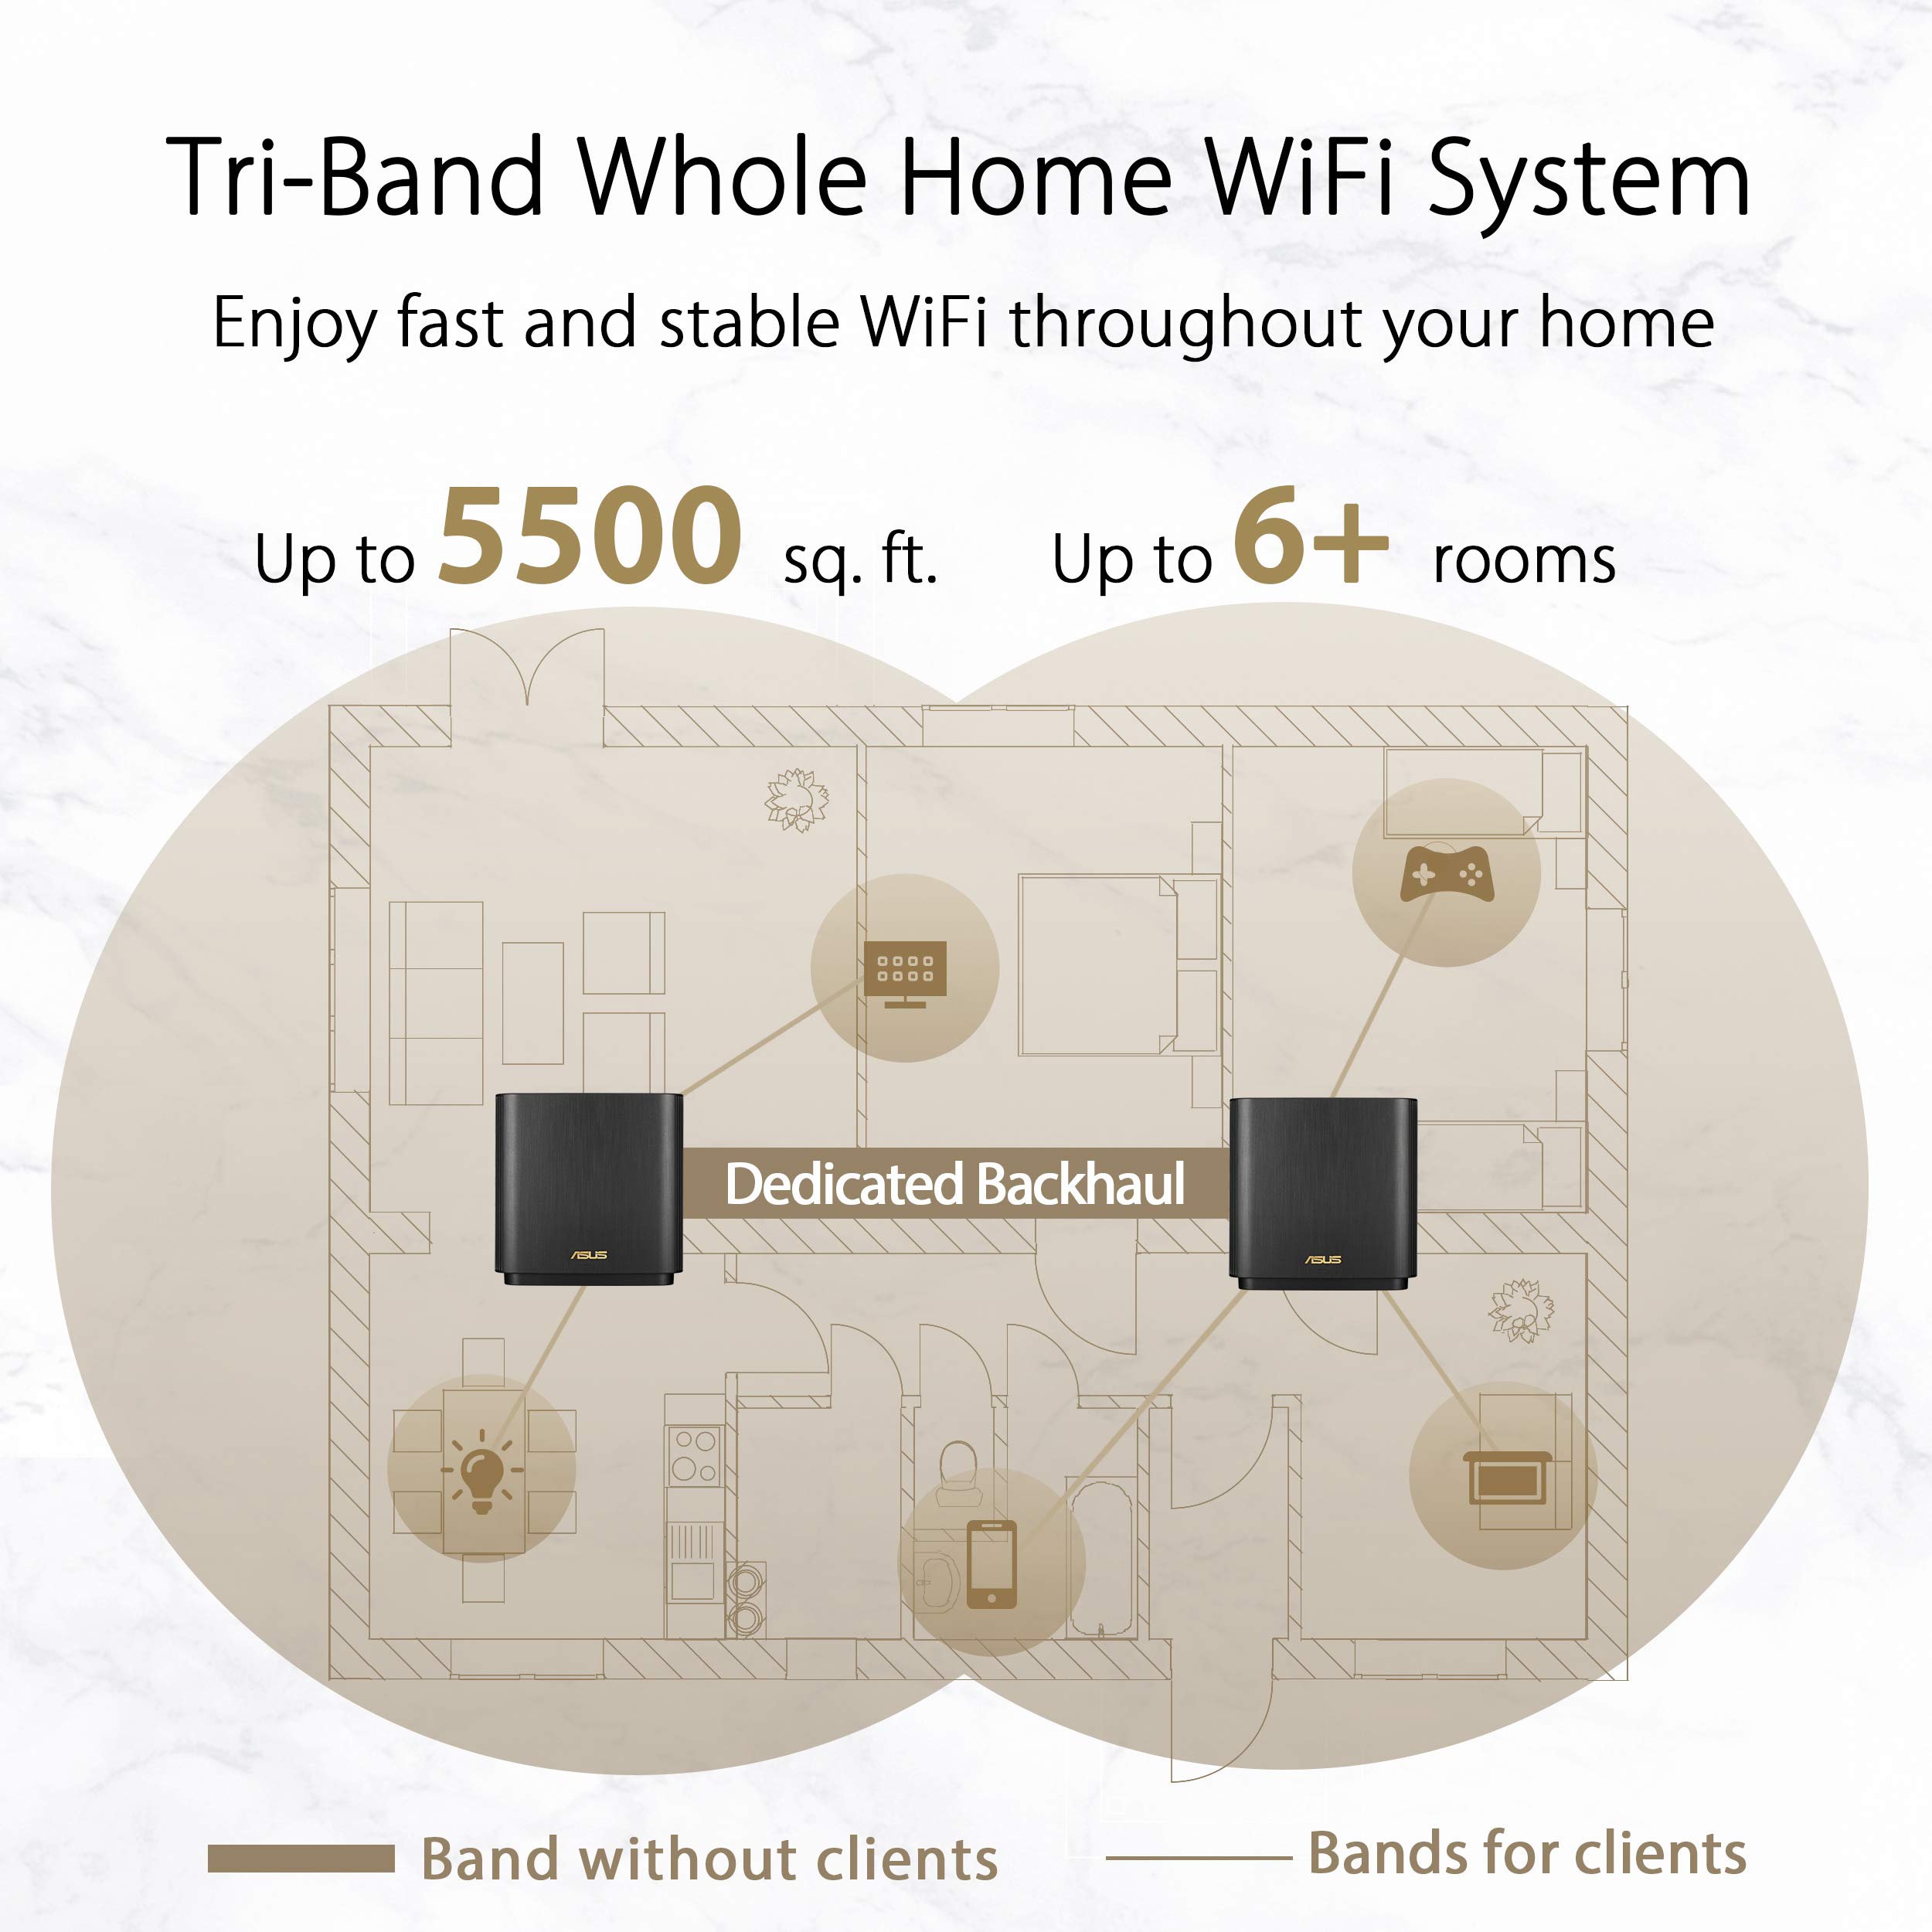 ASUS ZenWiFi AX6600 Tri-Band Mesh WiFi 6 System (XT8 2PK) - Whole Home Coverage up to 5500 sq.ft & 6+ rooms, AiMesh, Included Lifetime Internet Security, Easy Setup, 3 SSID, Parental Control, Black